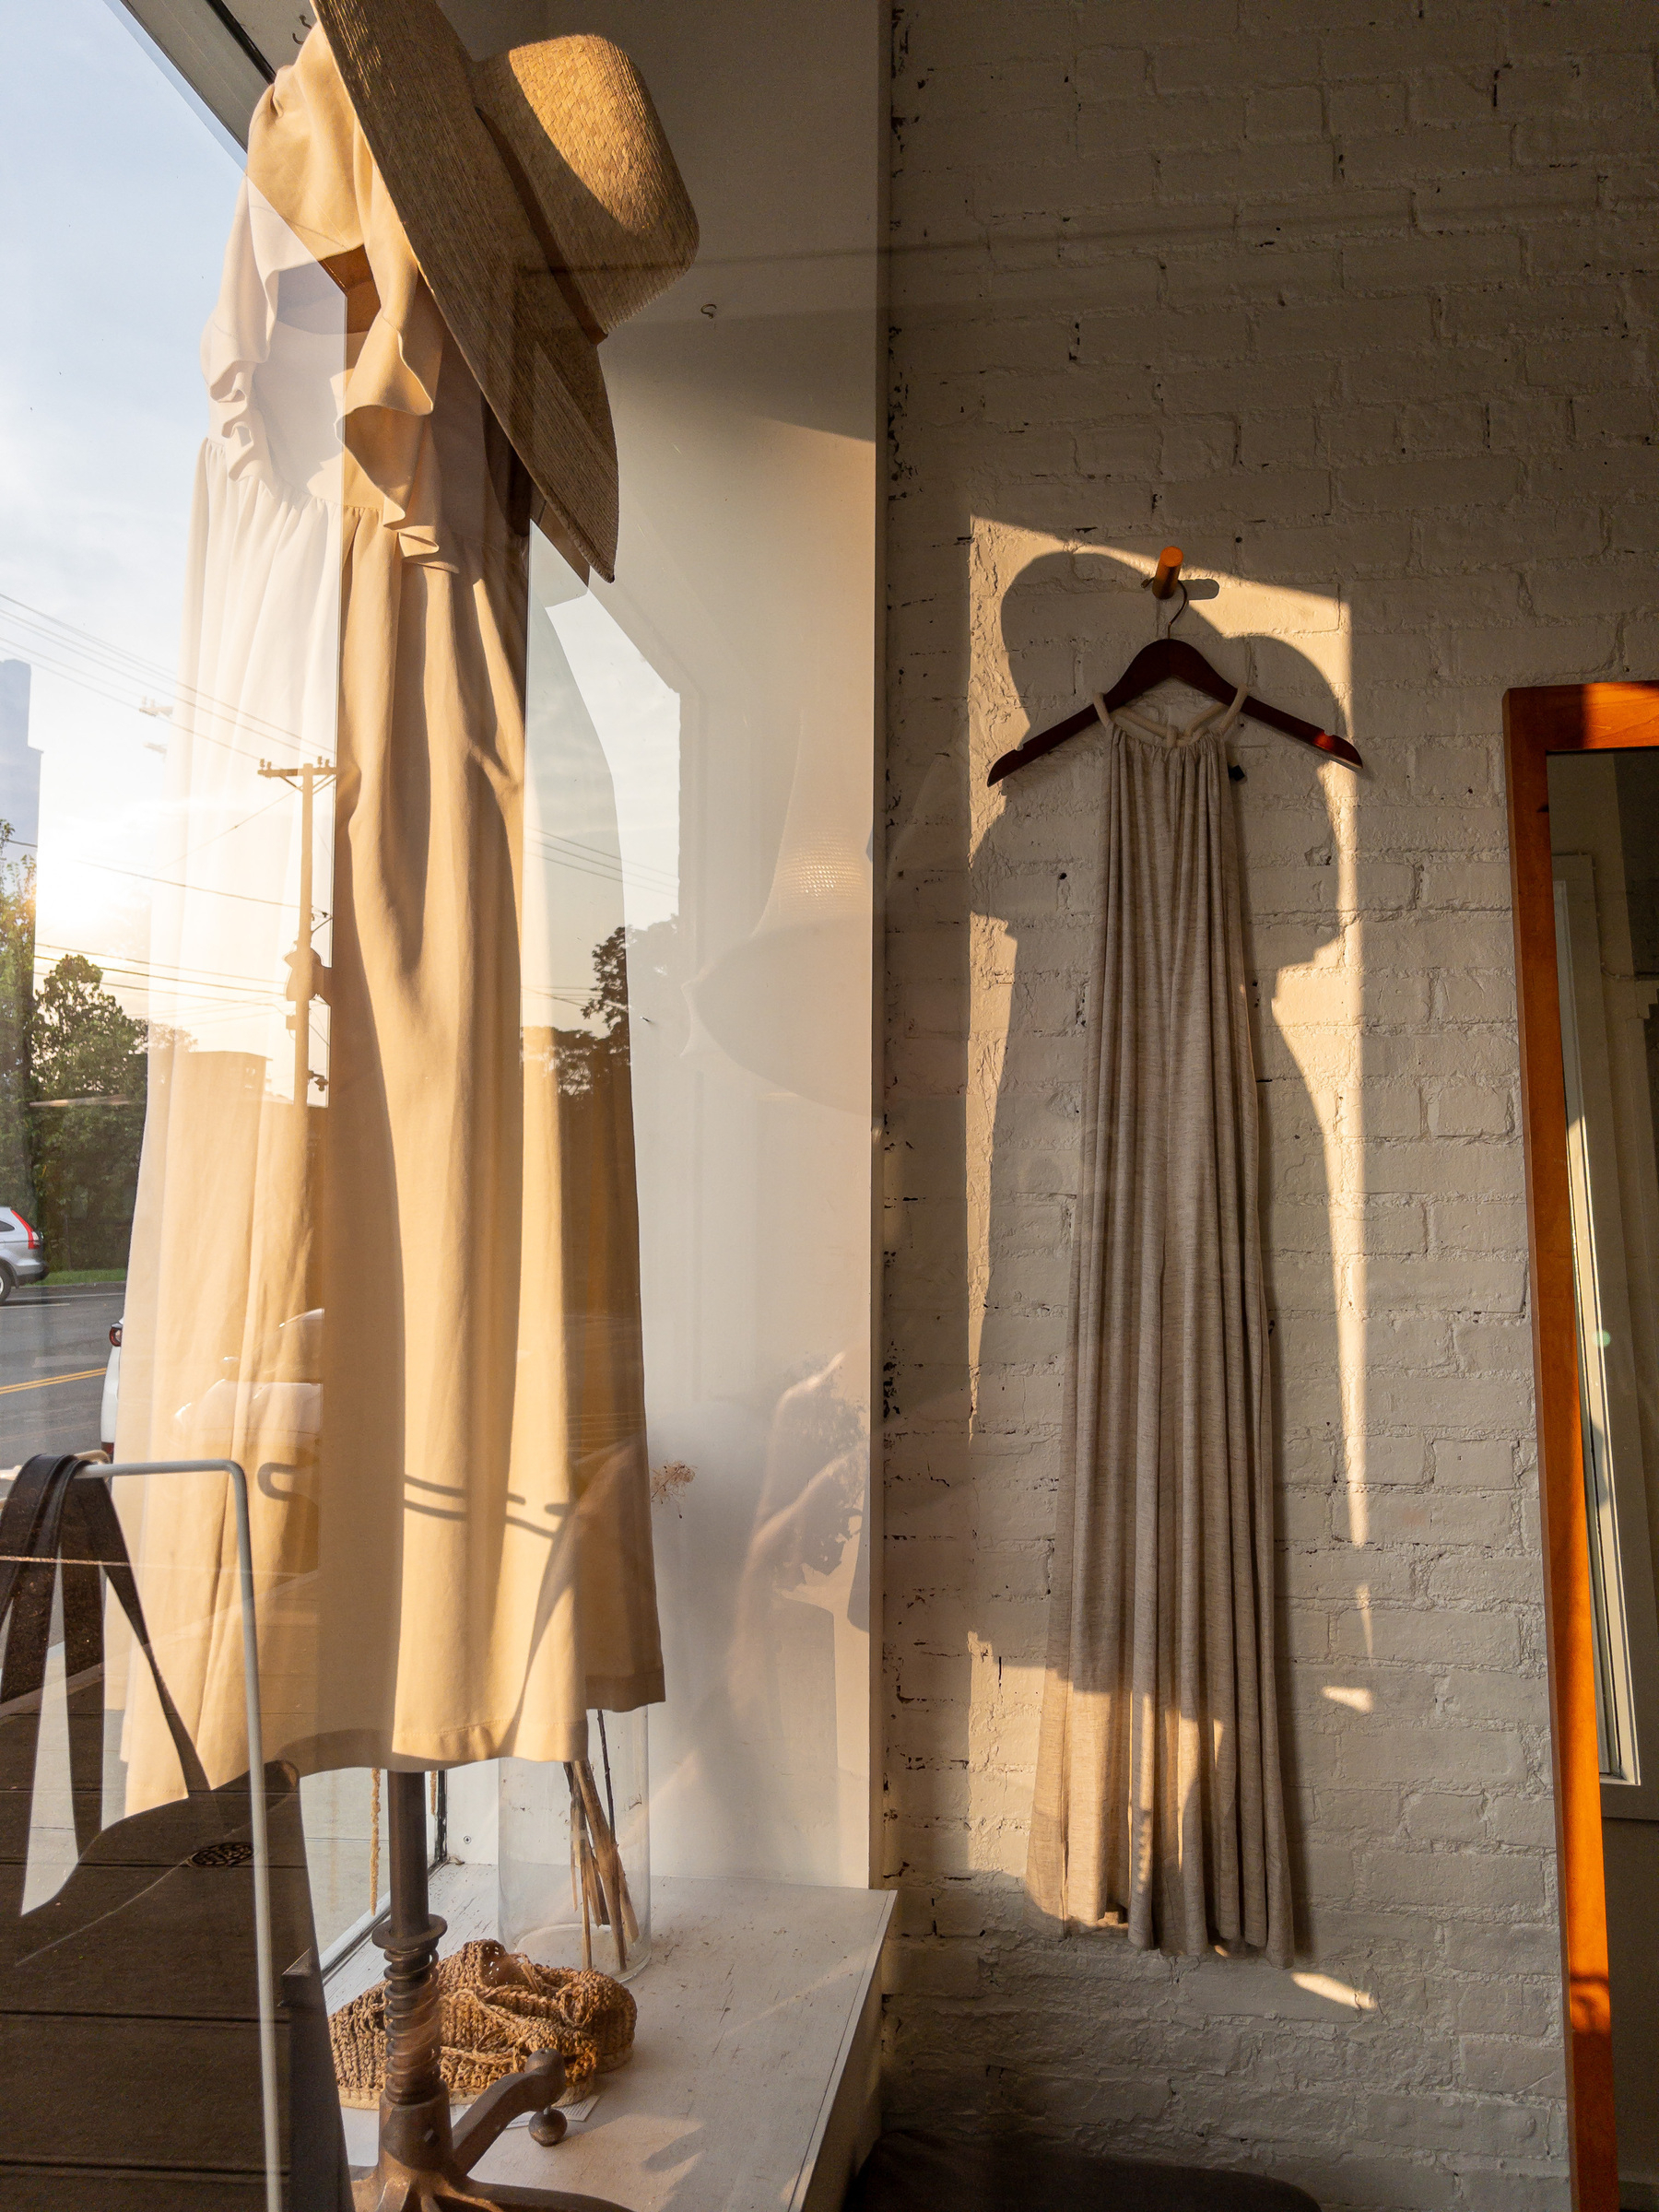 Interior of women’s clothing store with off white dress on a mannequin in the window and on the left and a sundress of similar color hanging on the wall from a hanger.